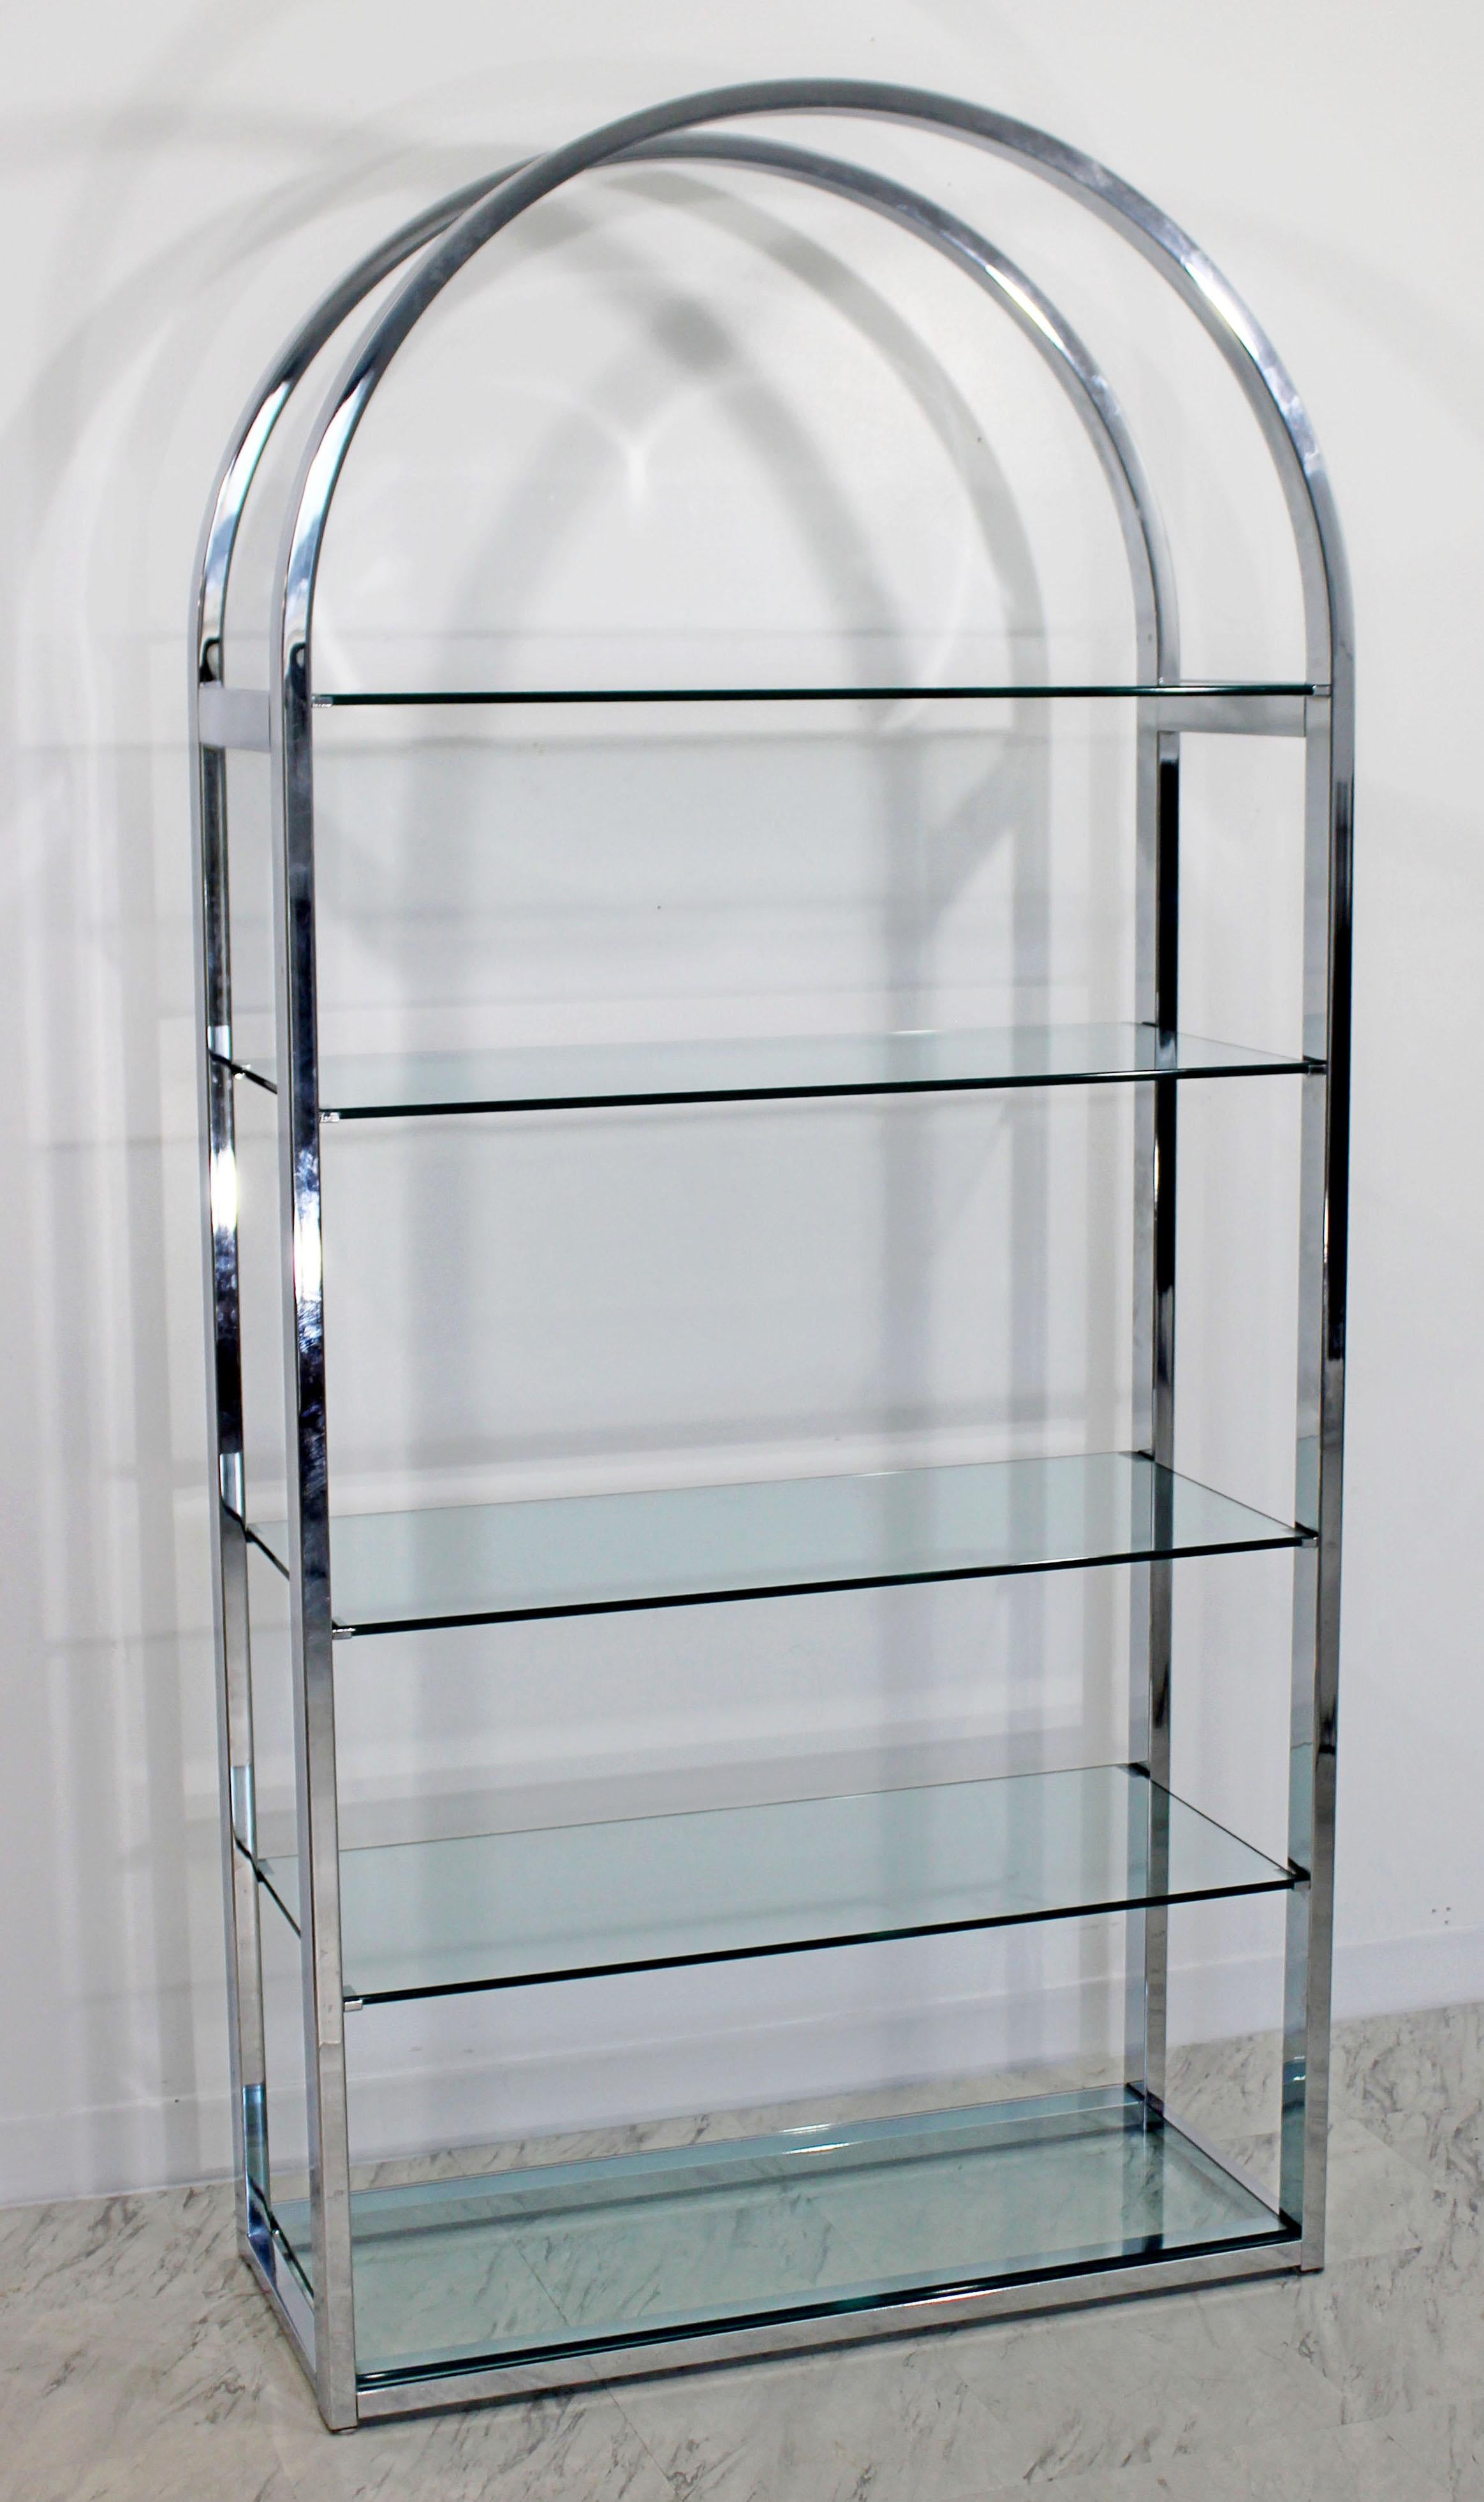 For your consideration is an incredible and unique, curved chrome étagère shelving unit, with five glass shelves, by Milo Baughman, circa the 1970s. In excellent condition. The dimensions are 38.25